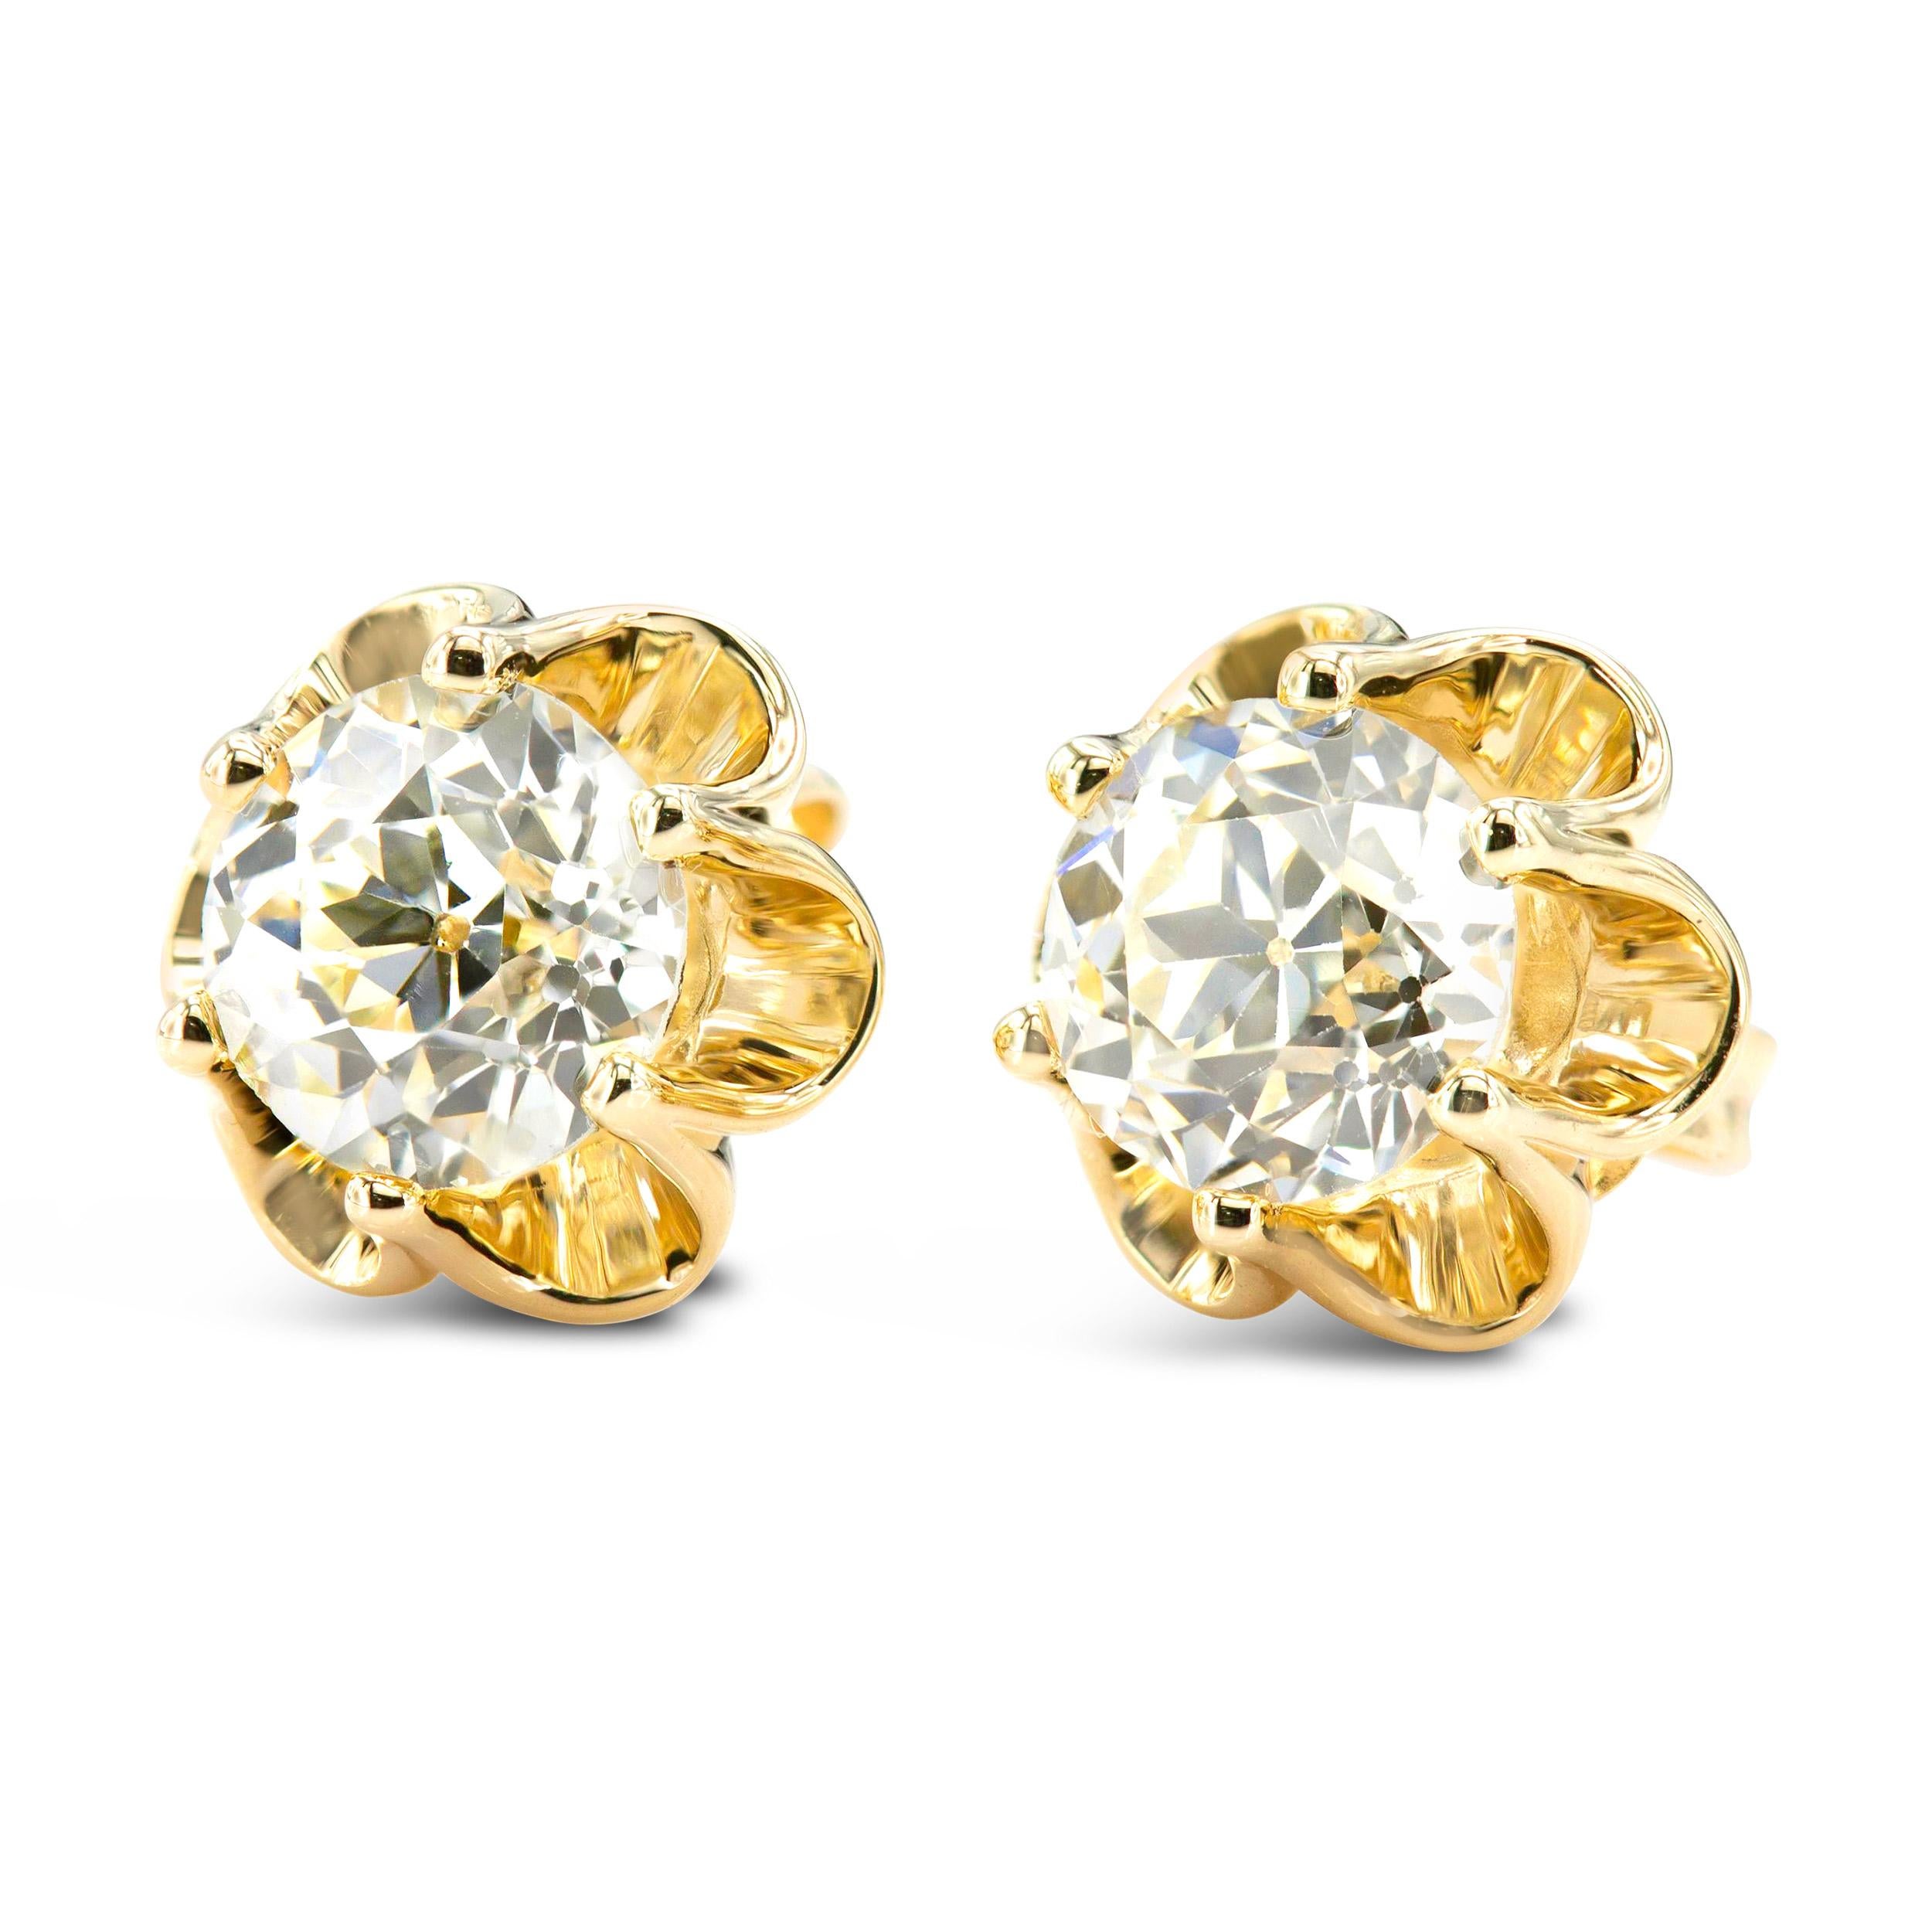 Our vintage inspired studs. The perfect size for everyday wear. We love these old European cut sparklers, weighing 1.36 carats total. In a super sweet 14kt yellow gold buttercup setting, we are just in love. This style can be created with any size